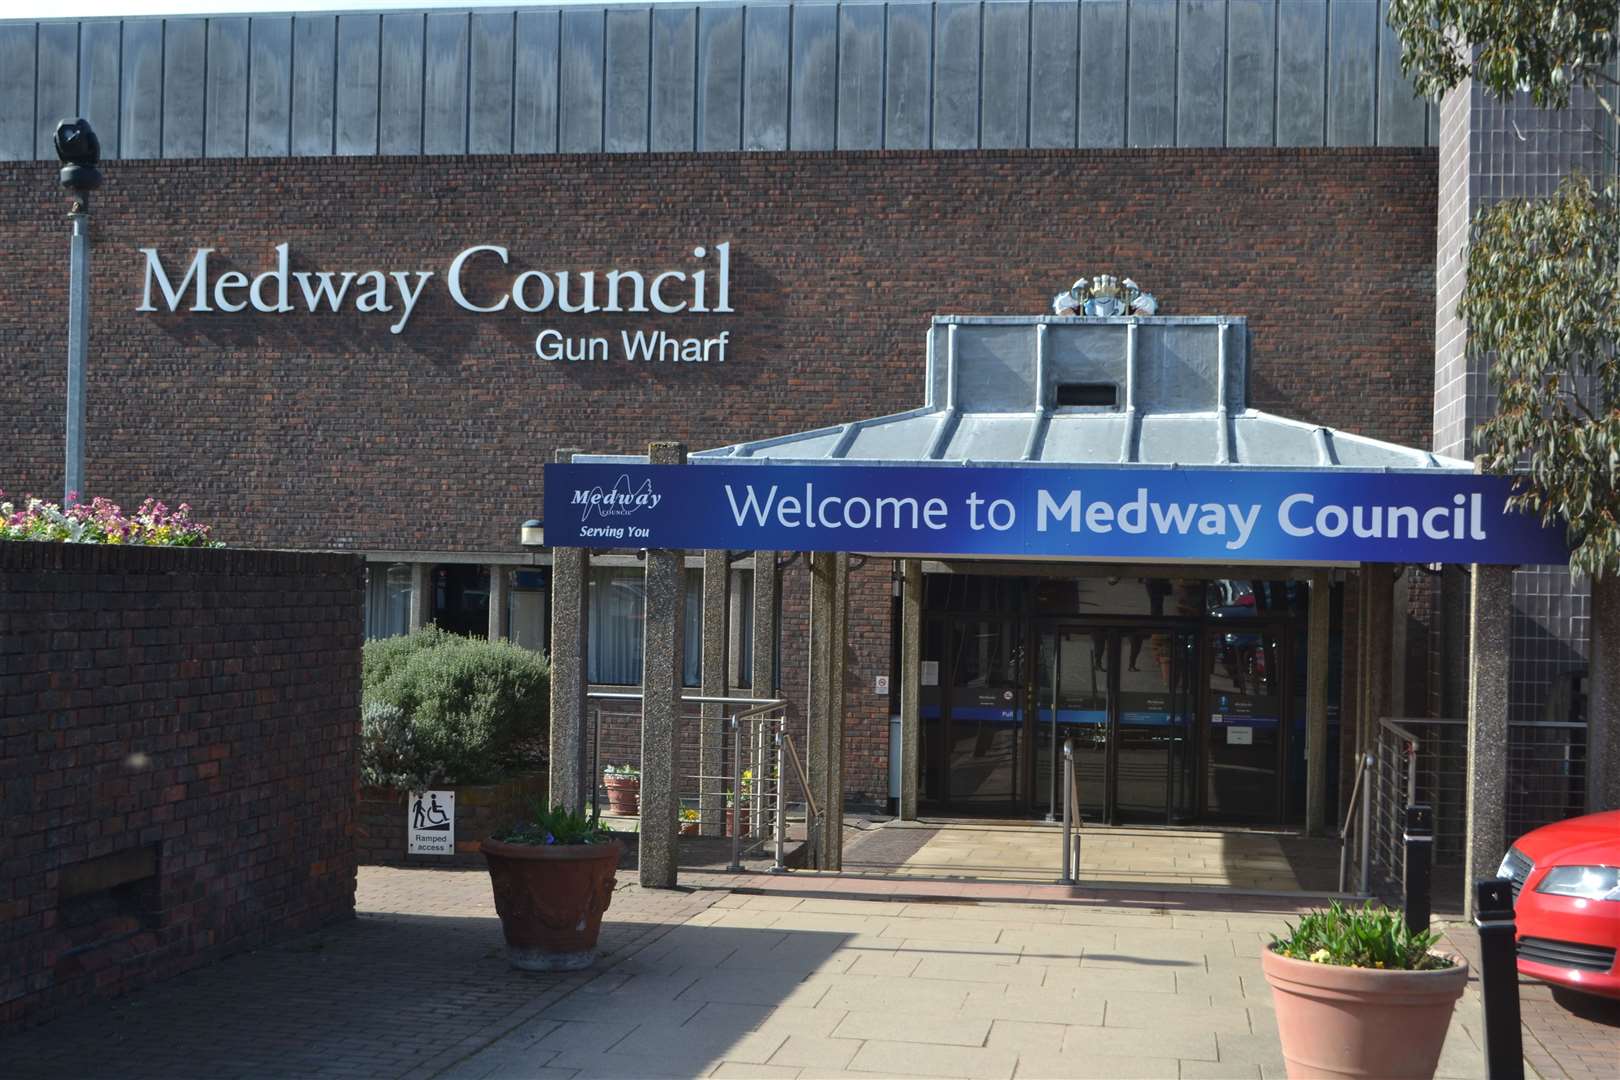 Medway Council has apologised to a family after leaving them to sleep rough during the pandemic